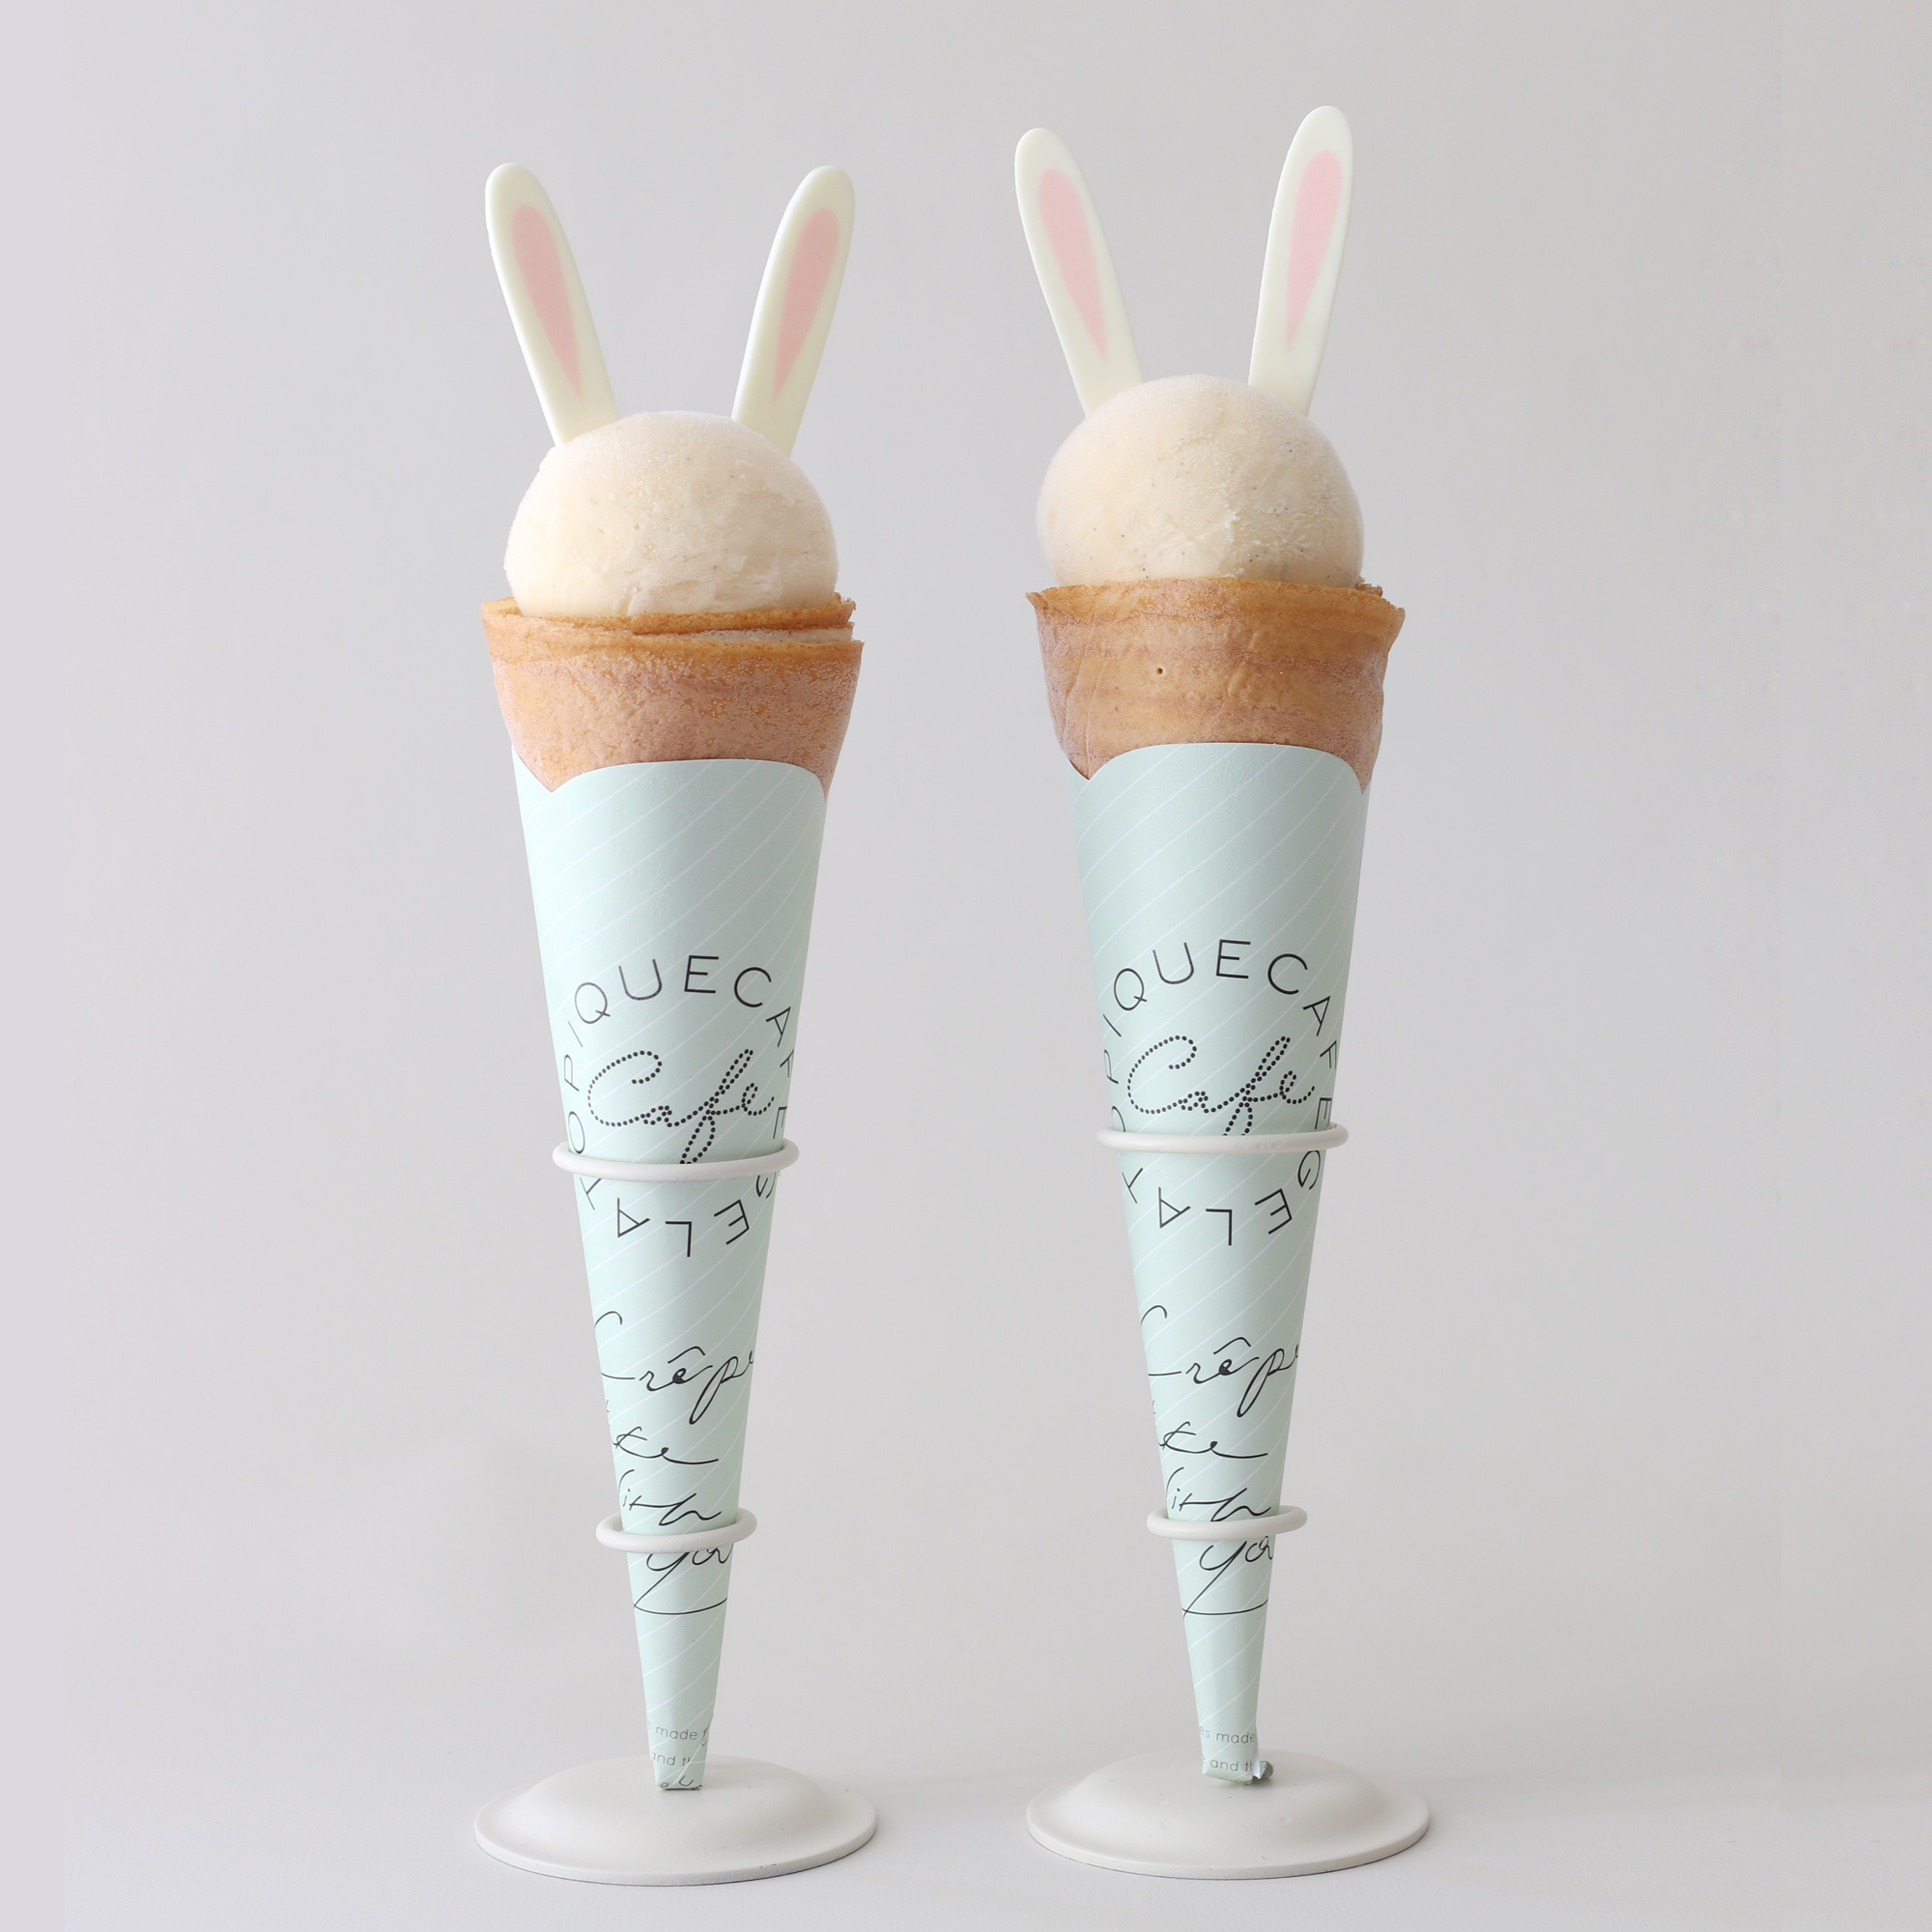 Ryokotomo - 5b86cd4c limited edition easter bunny sweets available at gelato pique cafe